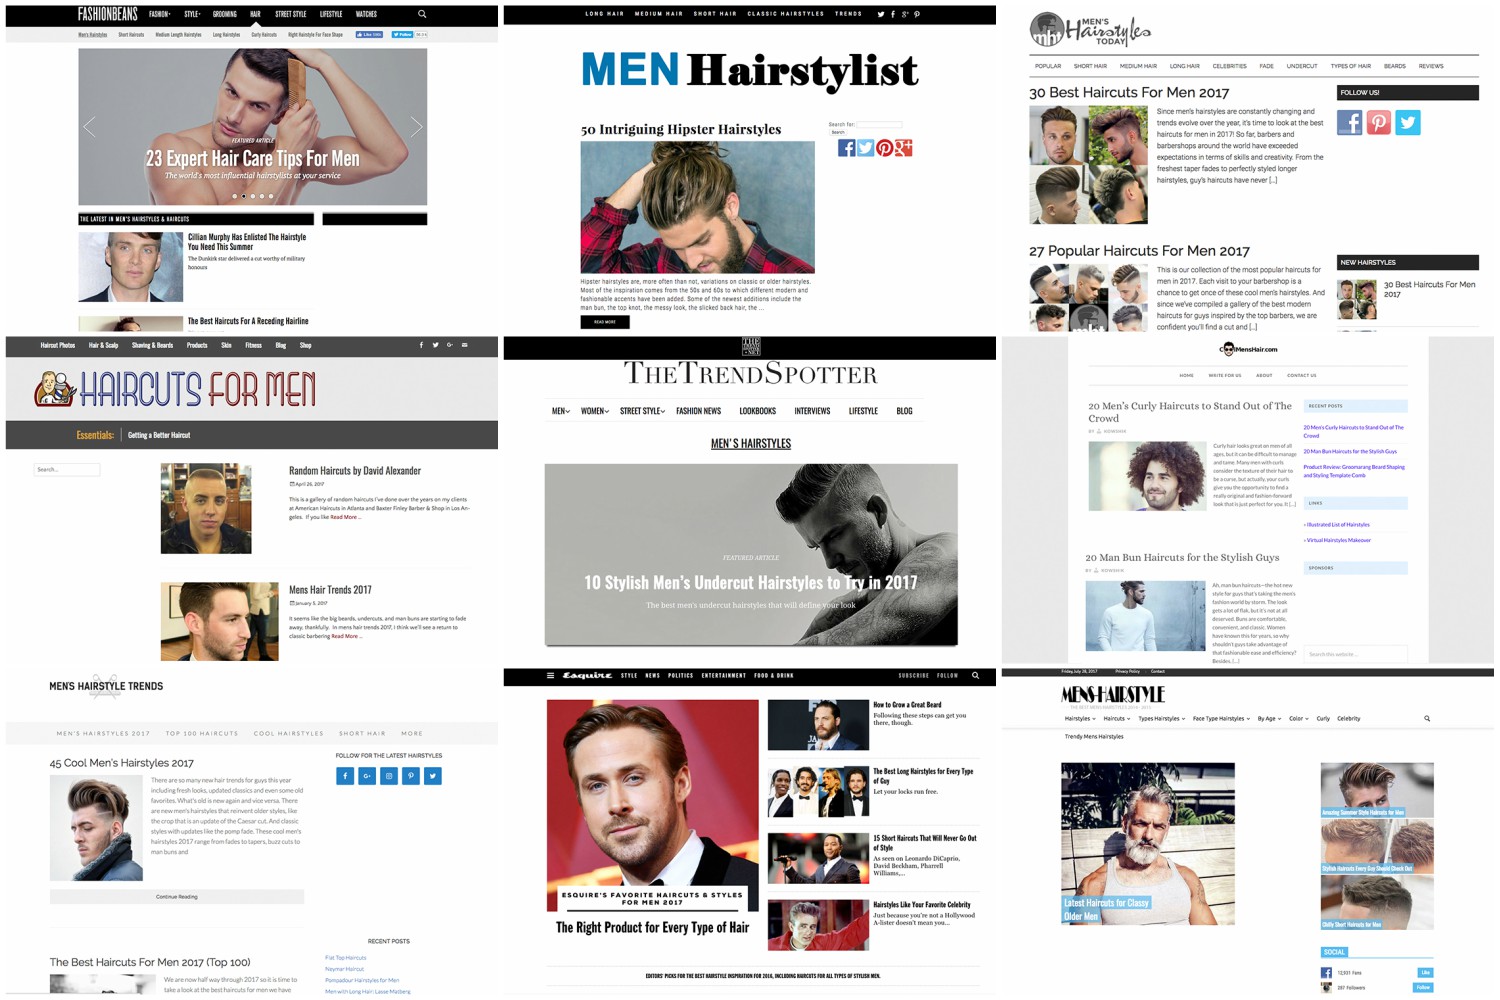 Hairstyles For Men Suggest Best One to Your Salon Clients